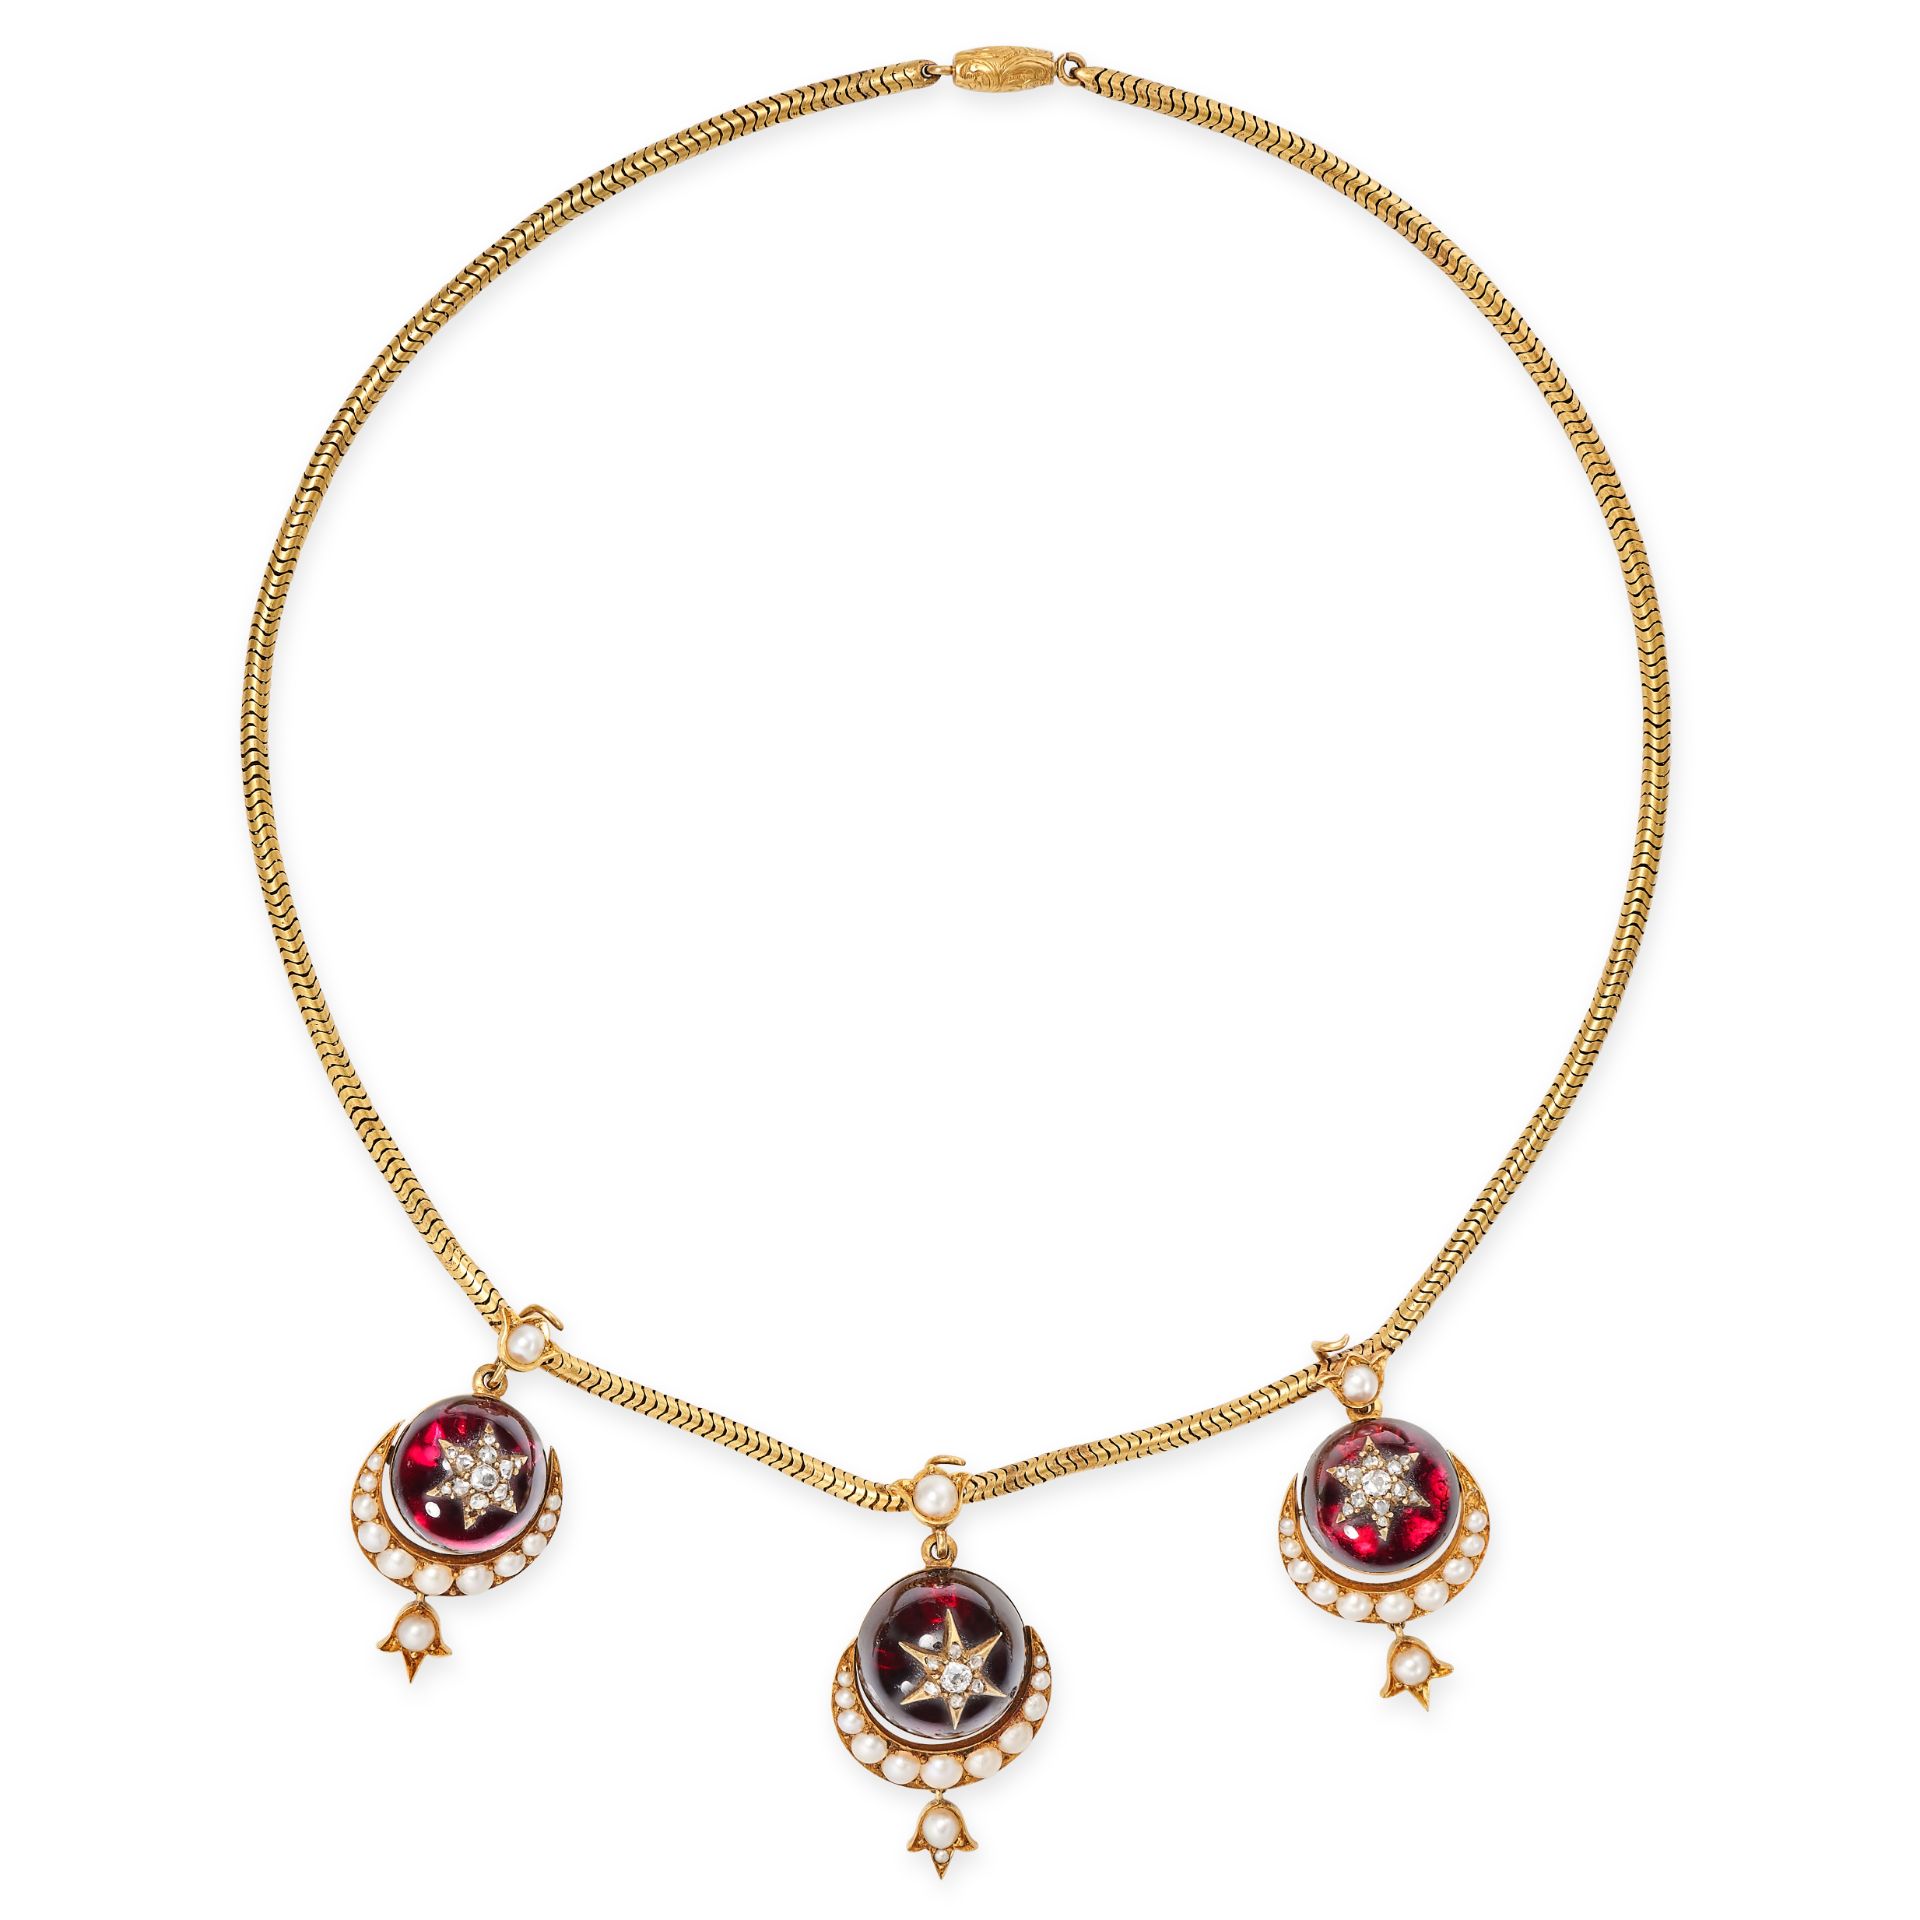 AN ANTIQUE GARNET, PEARL AND DIAMOND NECKLACE in yellow gold, the snake chain suspending three de...